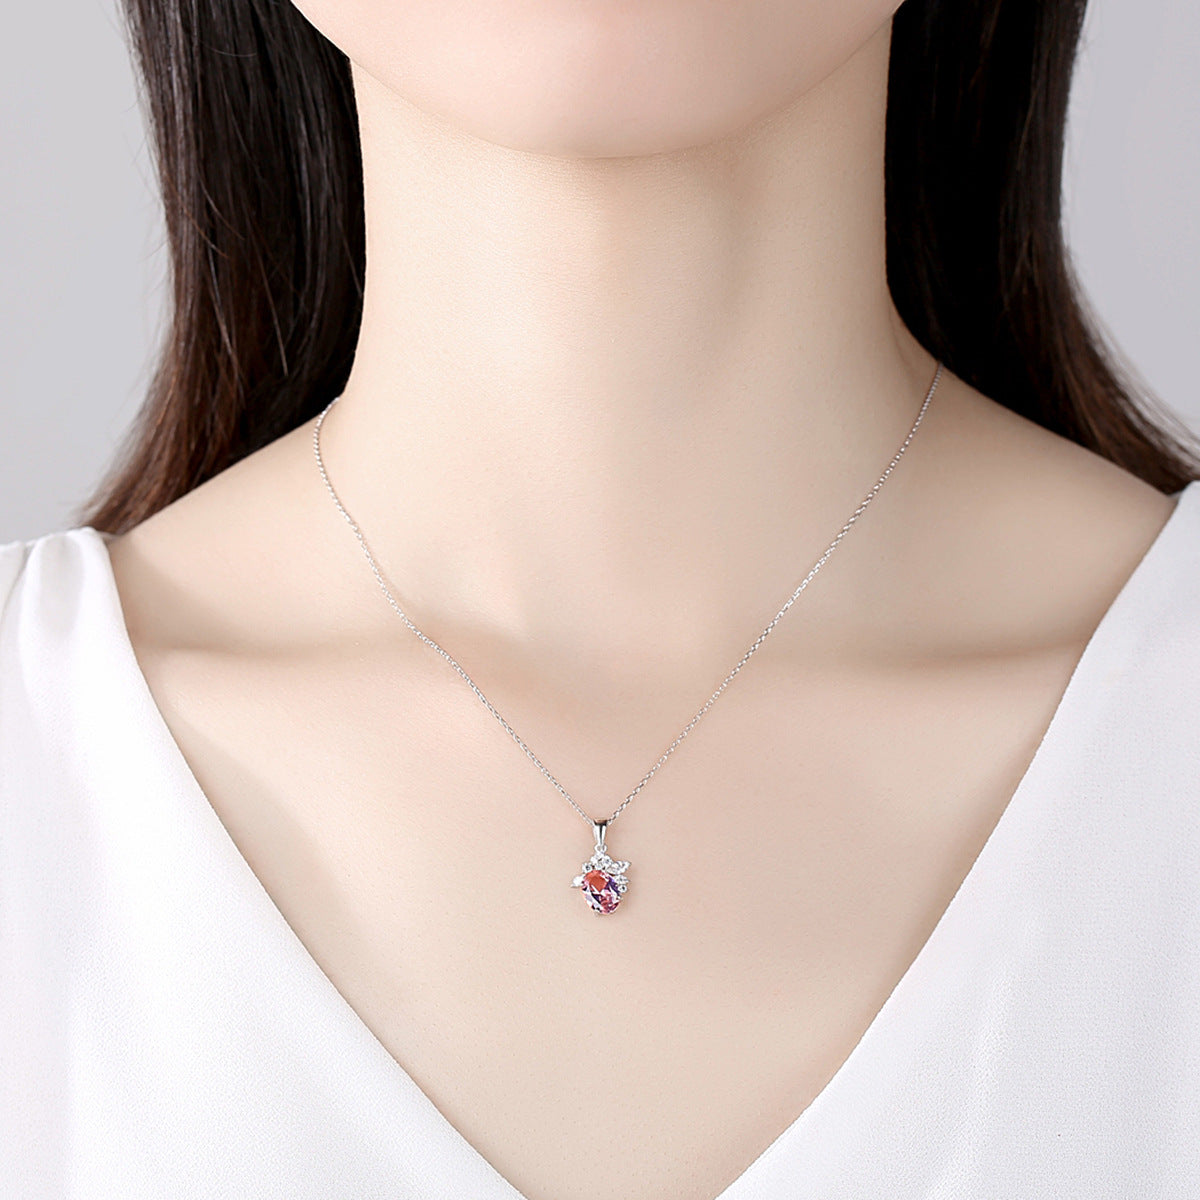 Gemstonely- Minimalist and Elegant: S925 Silver Necklace with Morganite Gemstone Pendant for Women